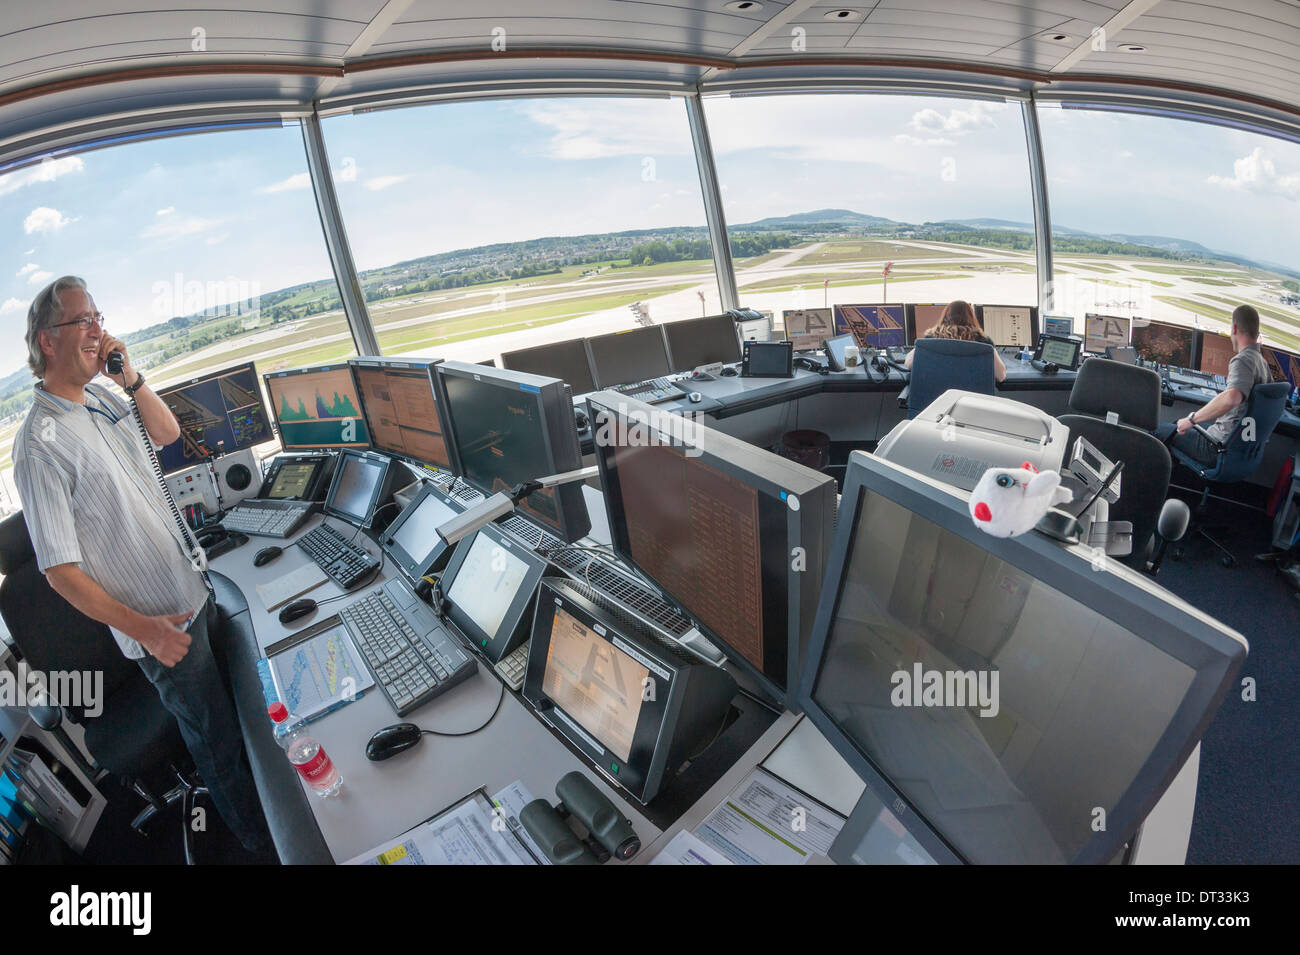 Air traffic controllers in the control tower of Zurich/Kloten international airport are monitoring the airport's airfield. Stock Photo